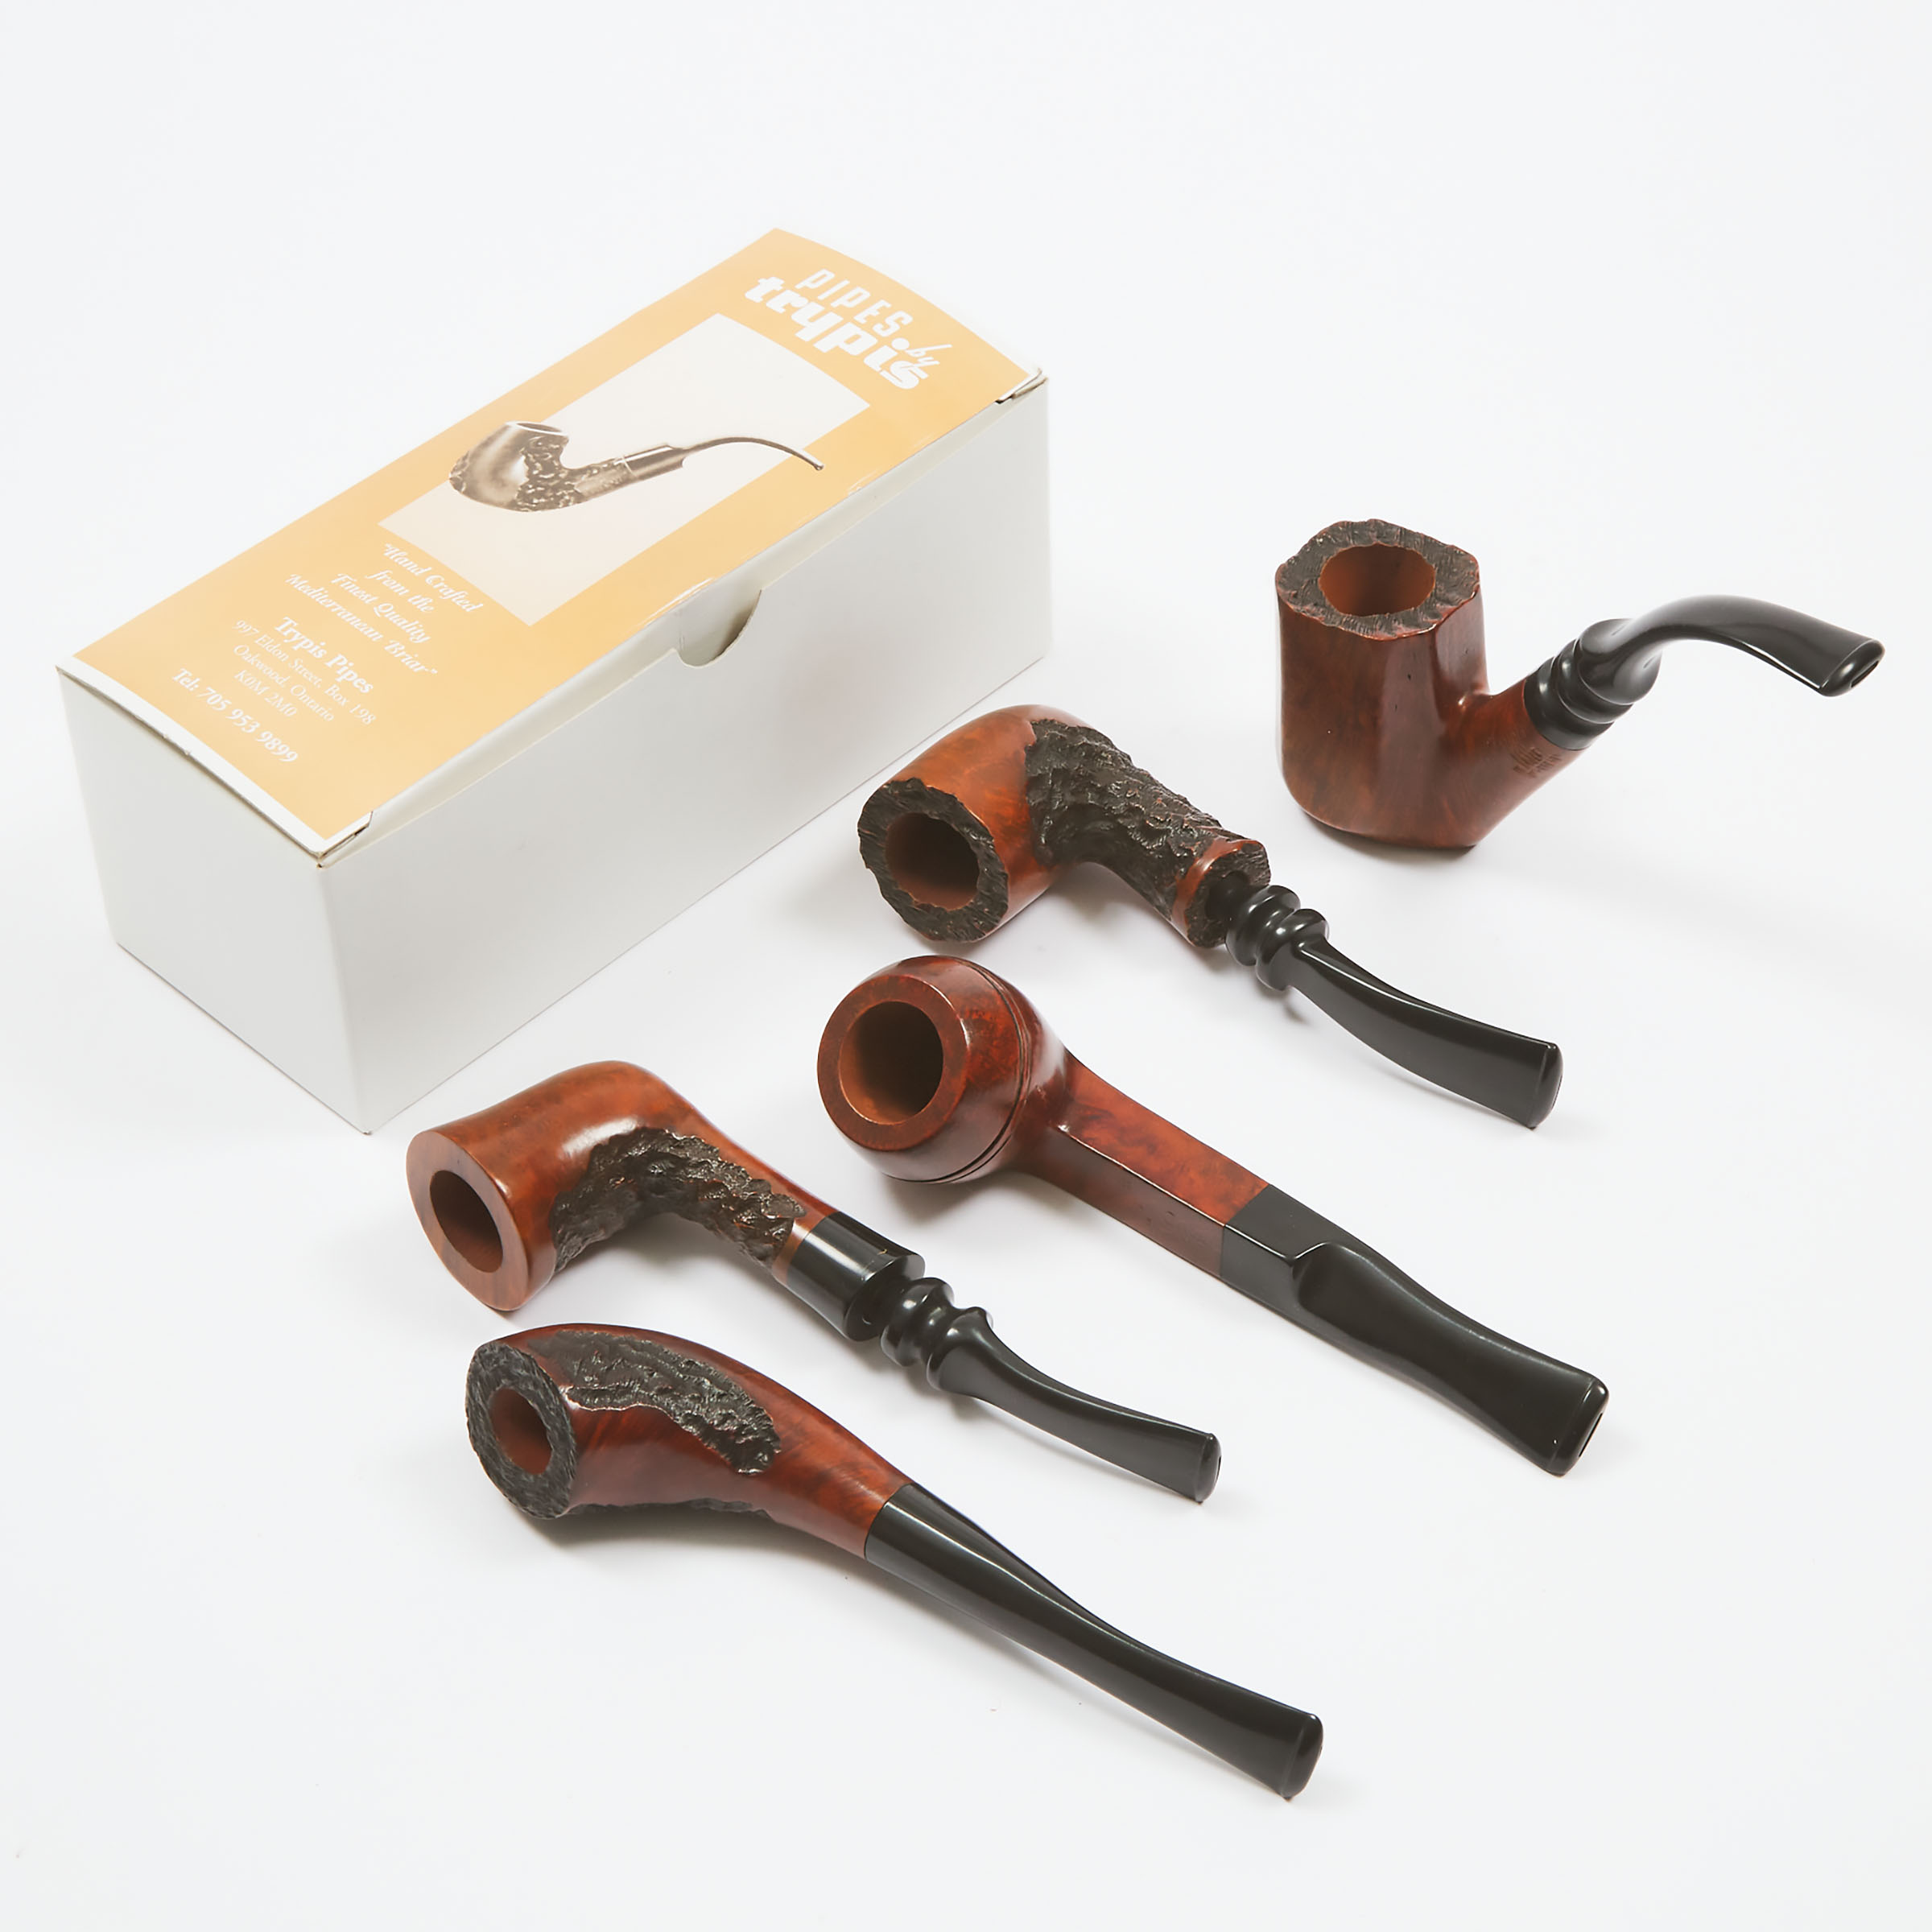 Five Tobacco Pipes by Trypis, Oakwood, ON, Canada, 21st. century